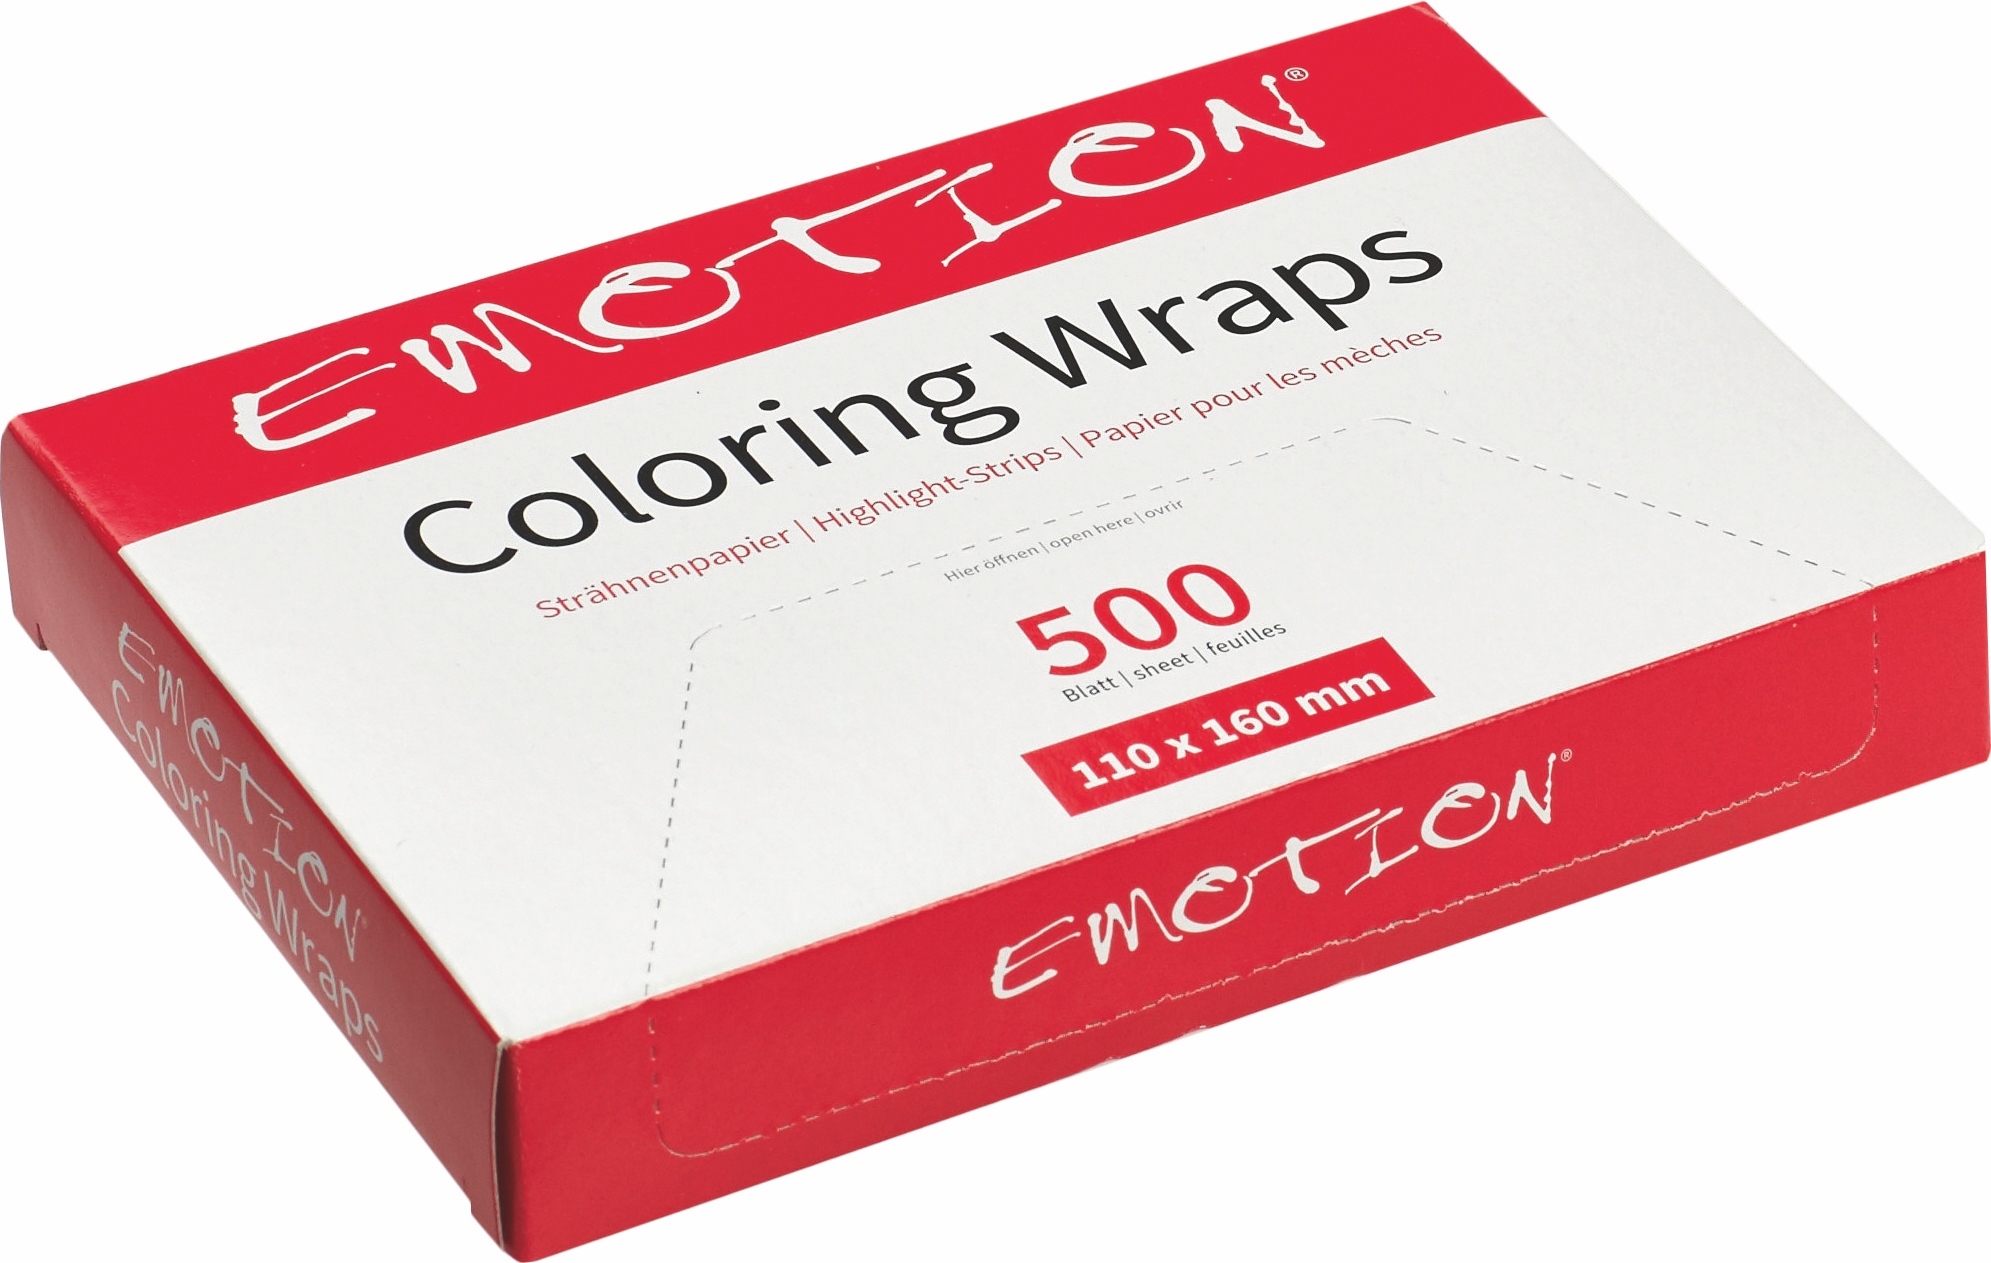 COLORING WRAPS highlight strips